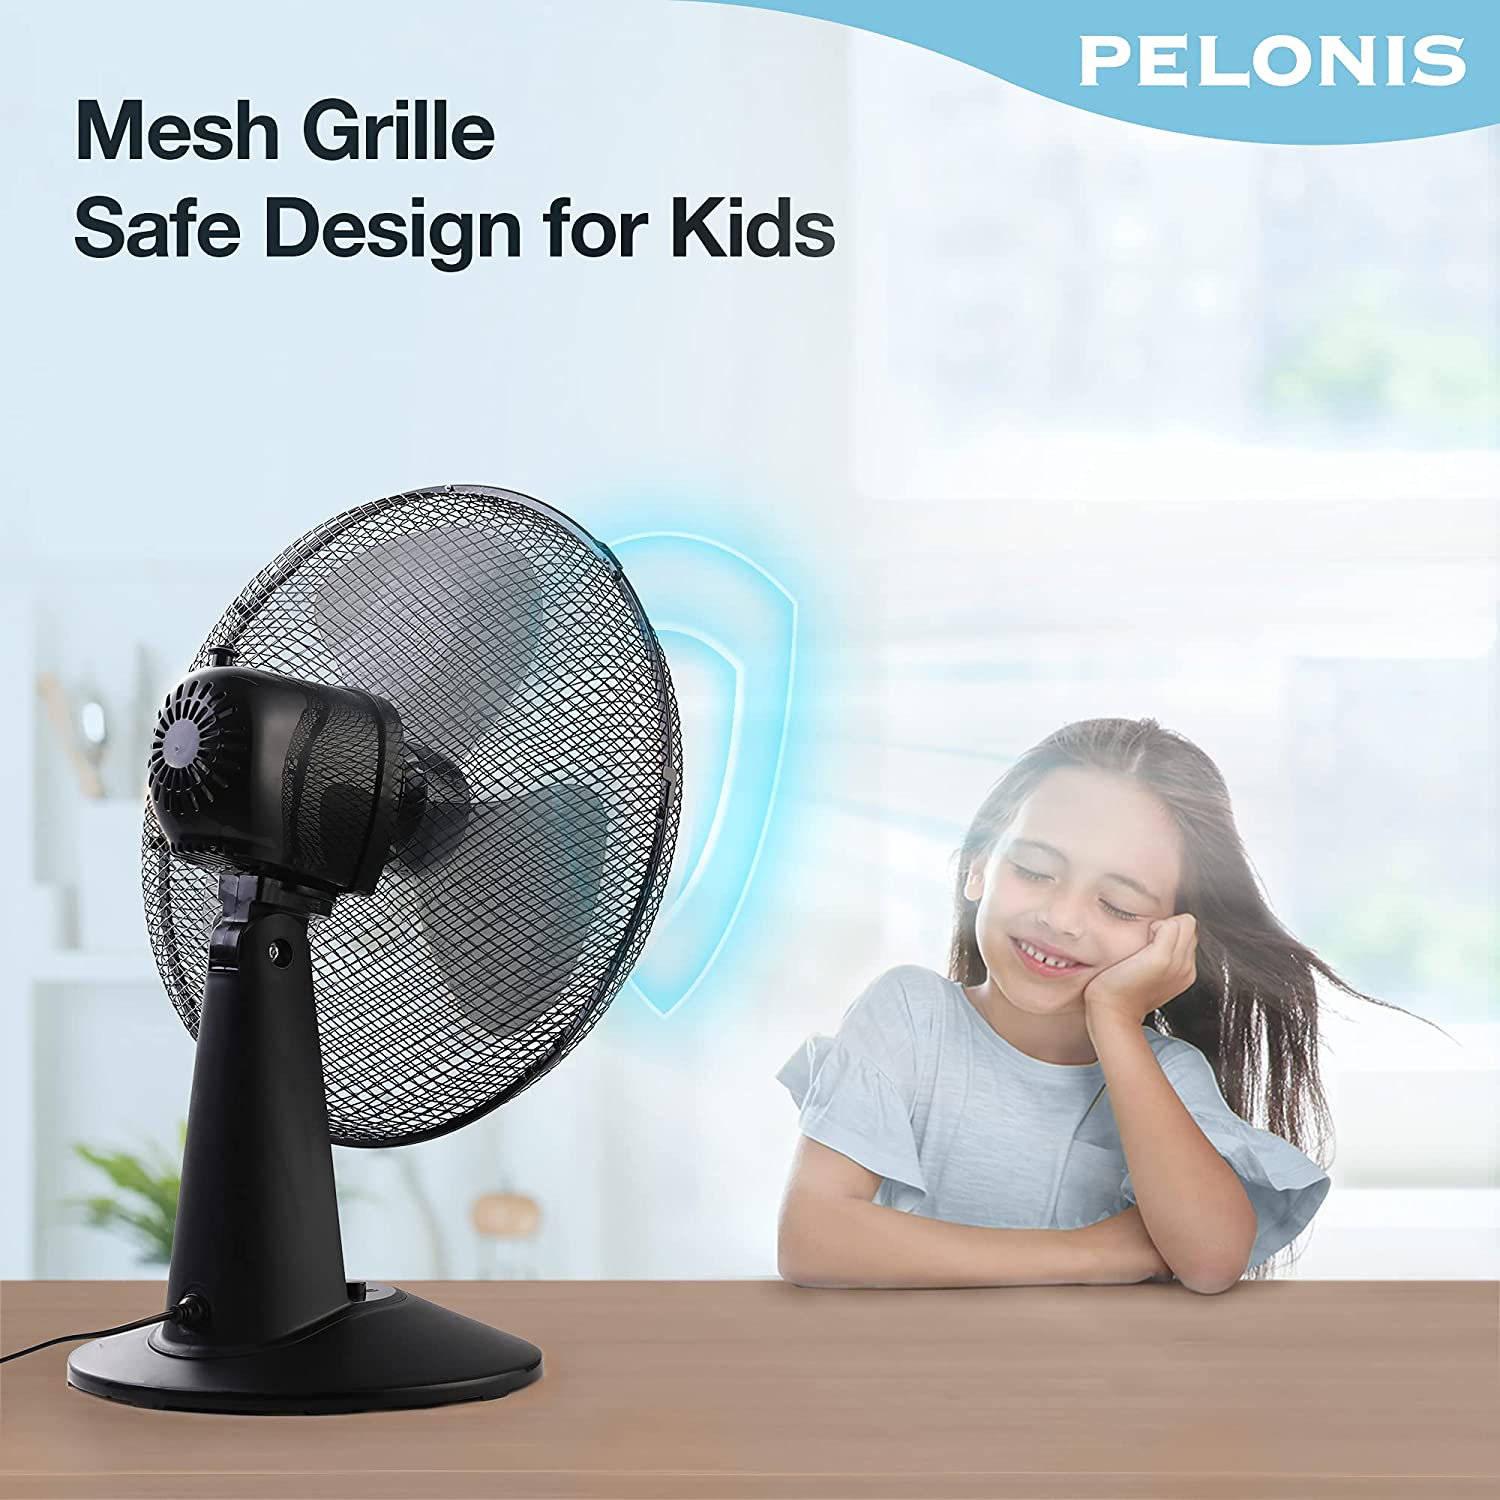 PELONIS Portable Desk Fan 14-inch / 35cm with 3 Speeds 85º Oscillation, 40W Electric Table Fan, Adjustable Head Low Noise, Strong Resistant Base for Bedroom and Office